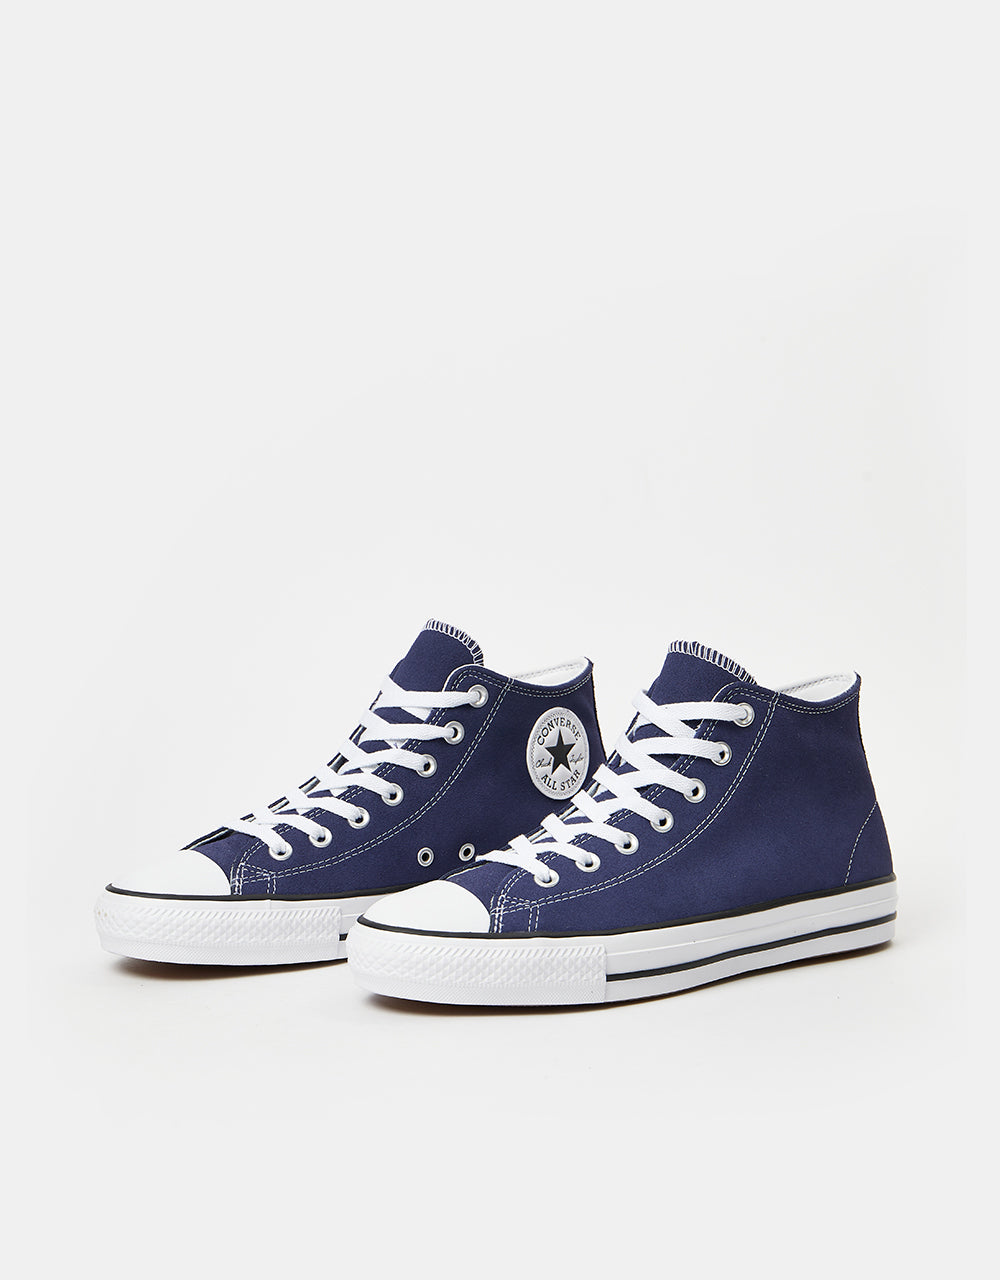 Converse Chuck Taylor All Star Pro Suede Daze Skate Shoes - Uncharted Waters/White/Black